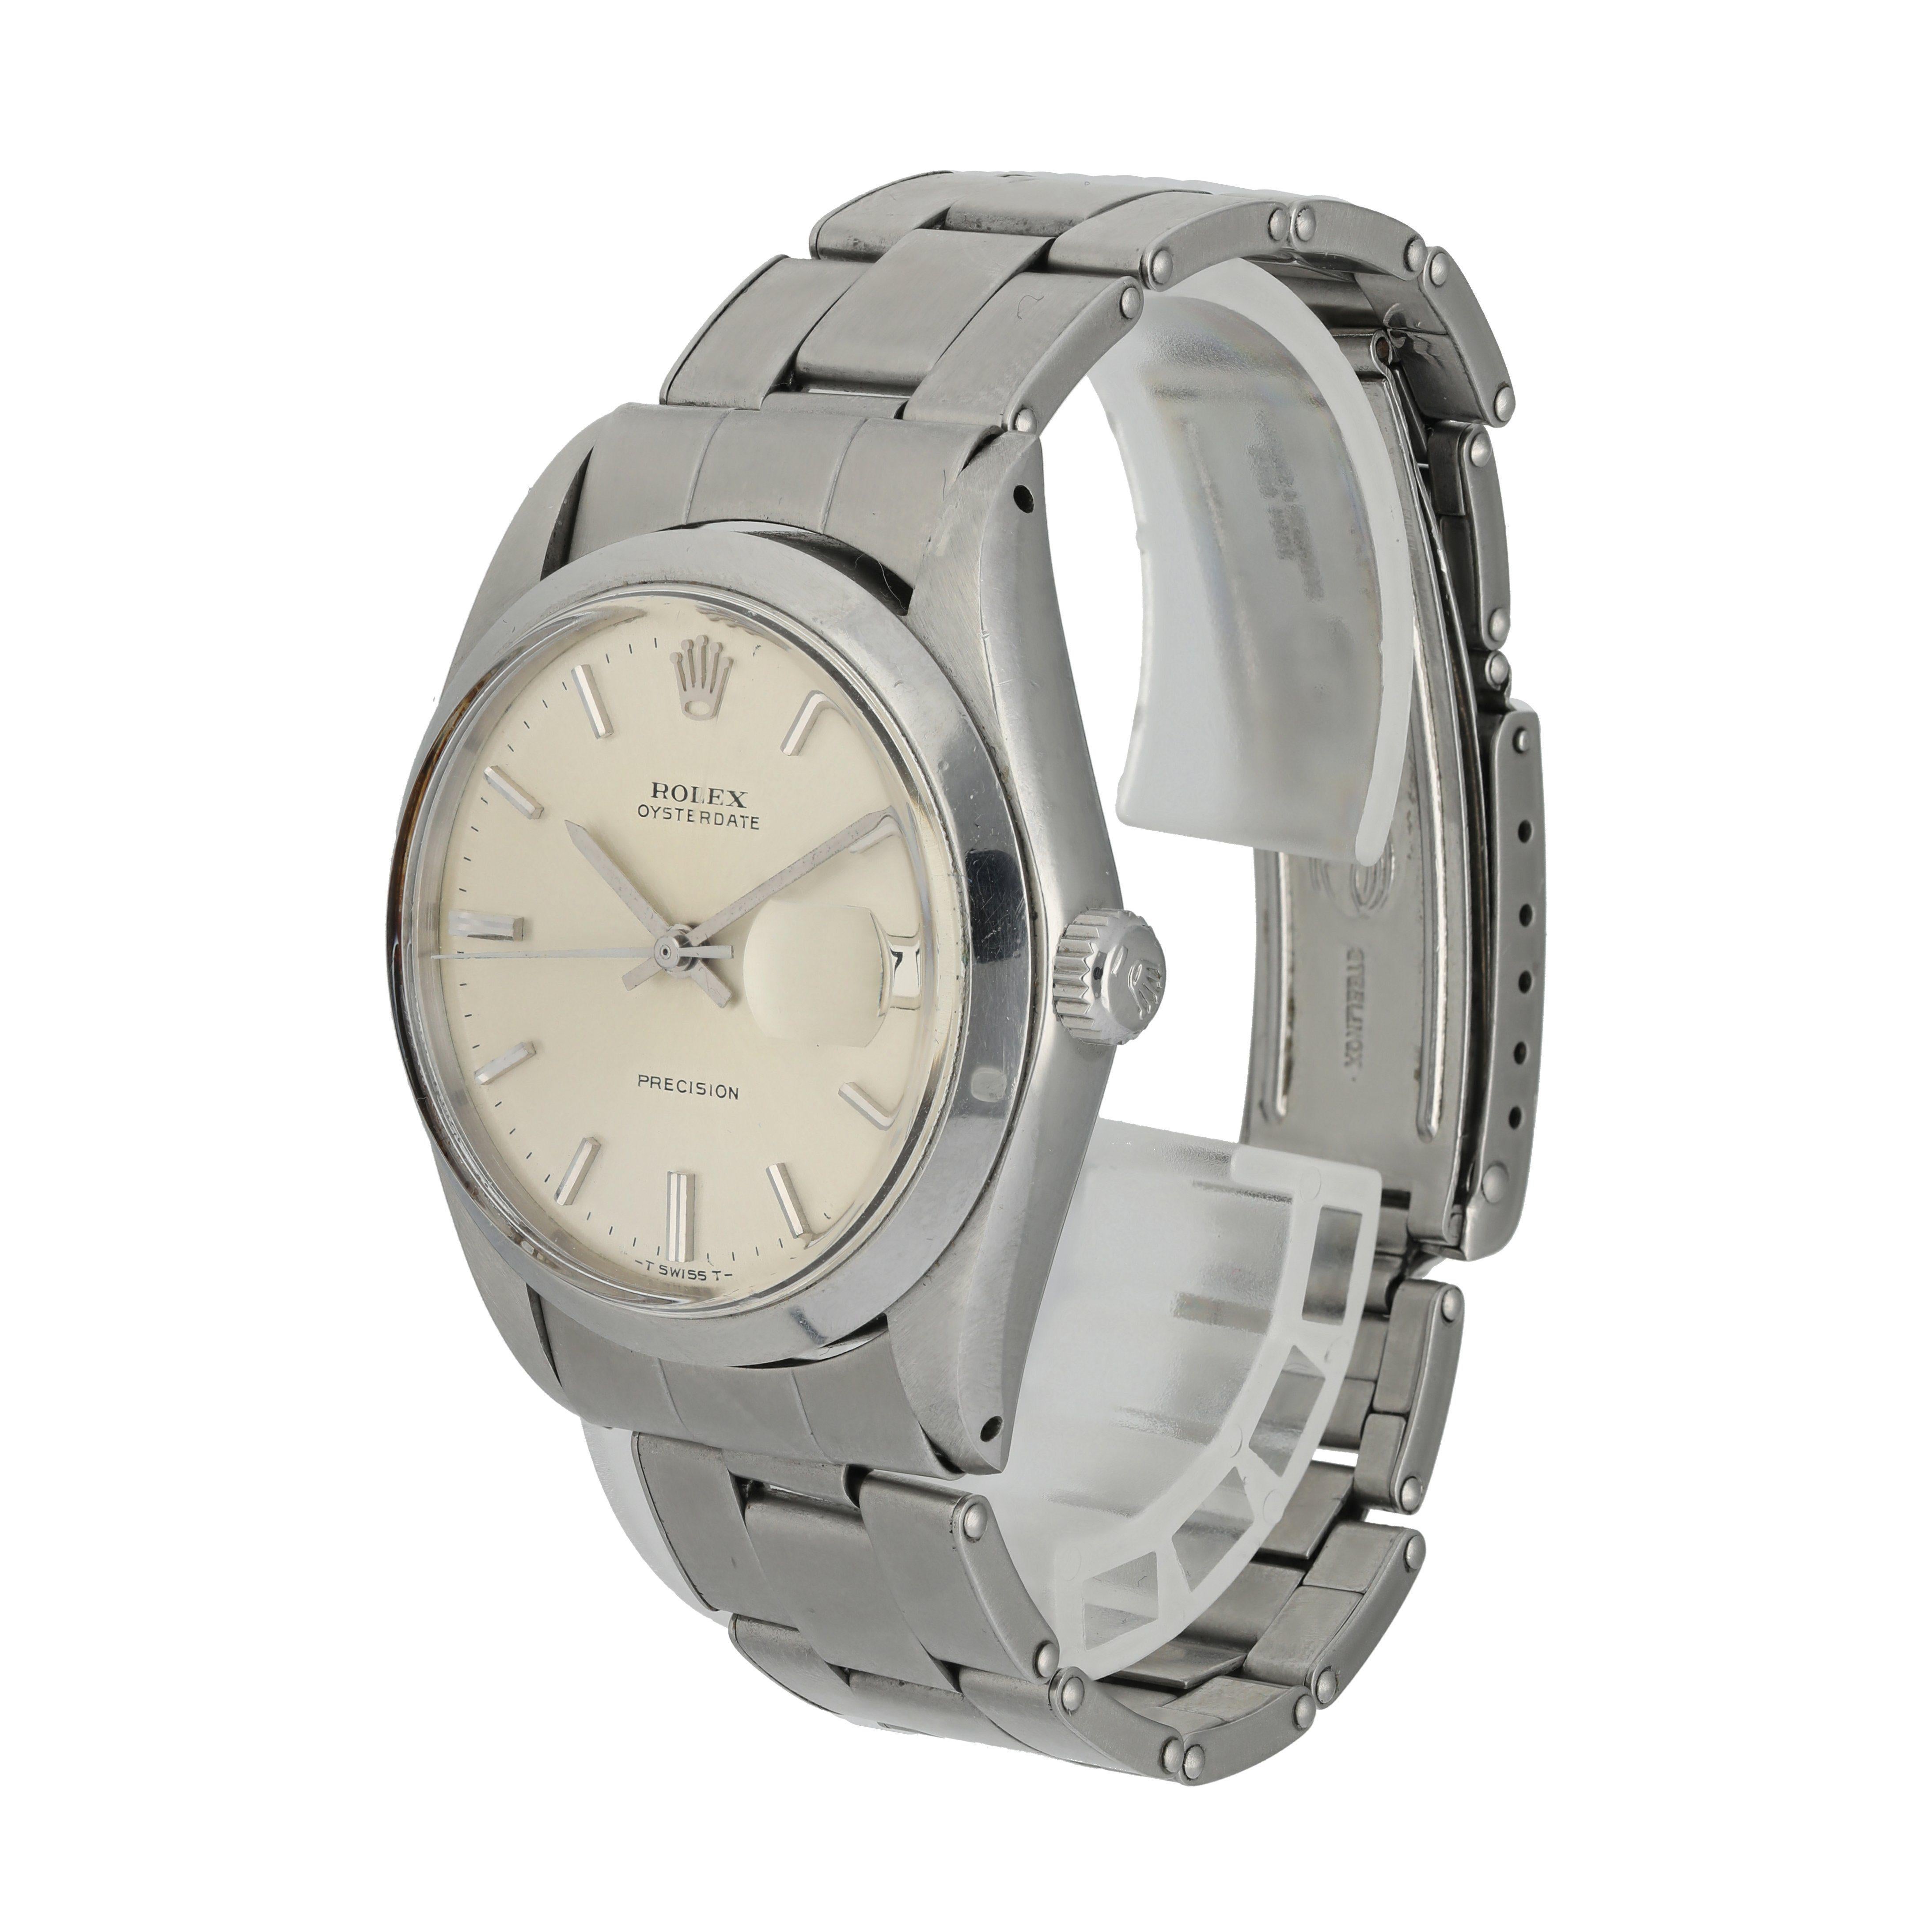 Rolex OysterDate Precision 6694 Vintage Men's Watch. 
34mm stainless steel case with a smooth bezel. 
Silver dial with silver-tone hands and indexes. 
Minute markers on the outer dial. 
Date Display at the 3 o'clock position. 
vintage rivet